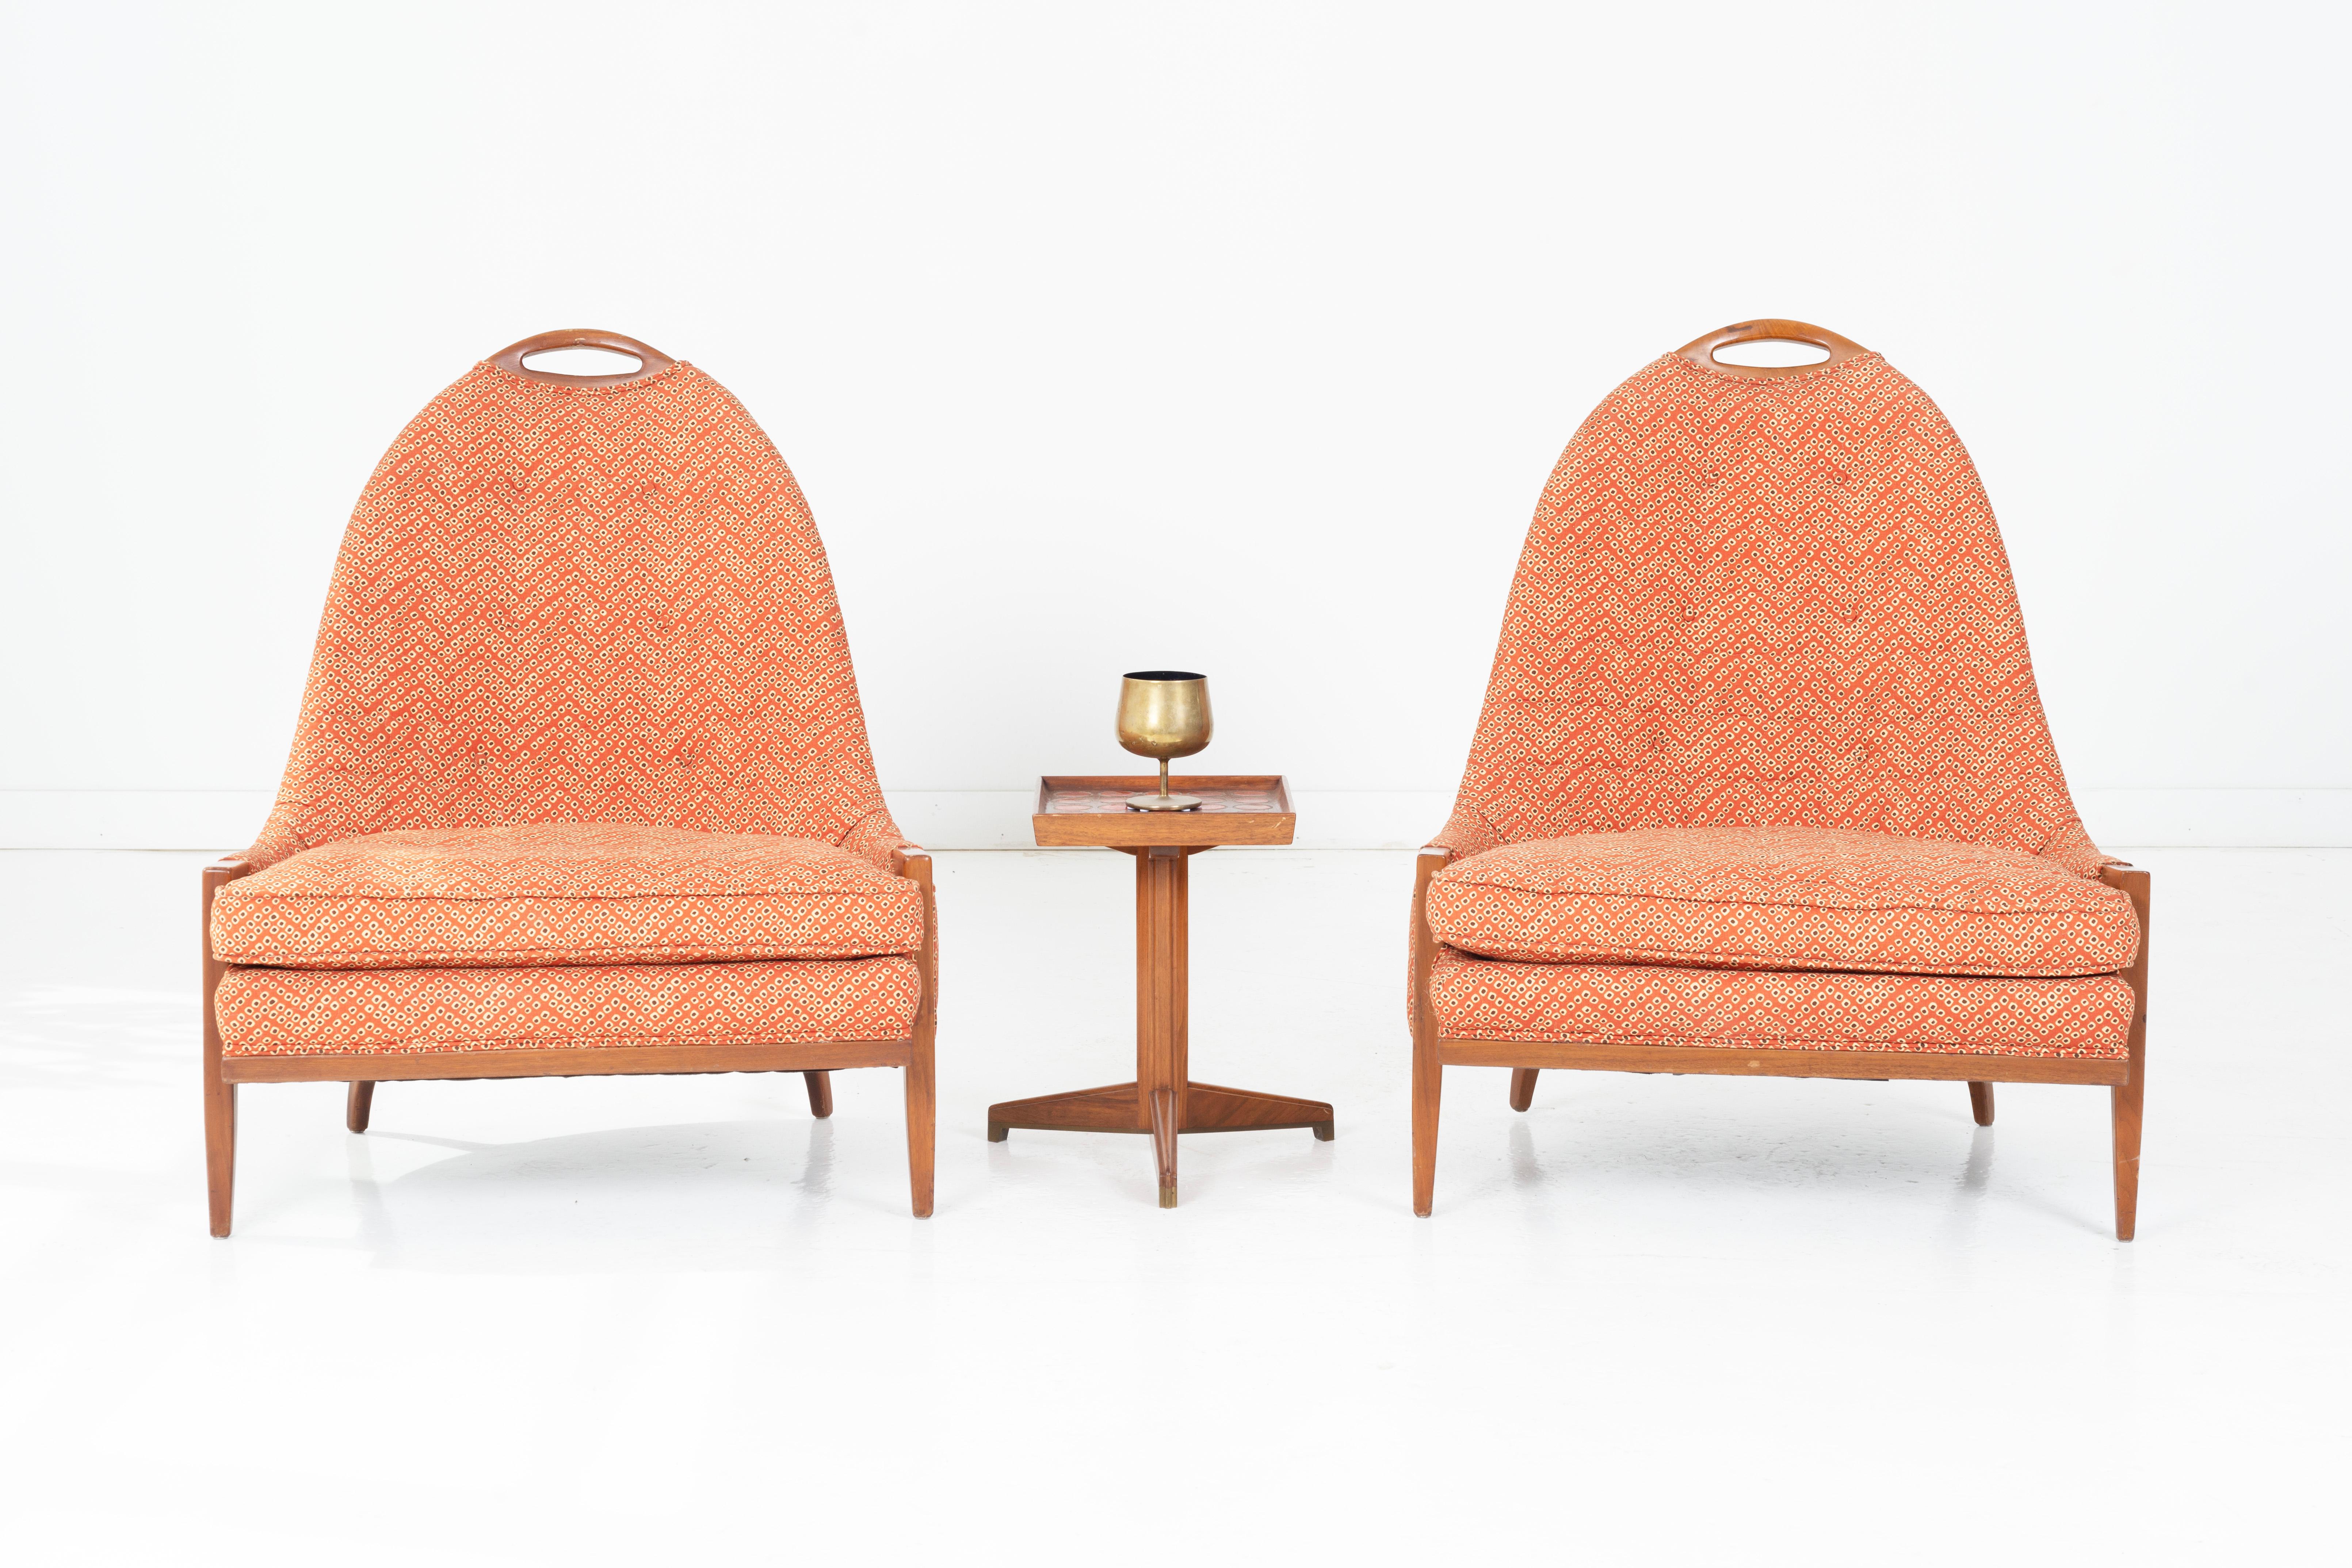 This exquisite pair of 1960s vintage slipper chairs, designed in the style of renowned mid-century modern furniture designer Harvey Probber, exudes sophistication and charm. The chairs feature elegant walnut handle backs and exposed walnut arms,